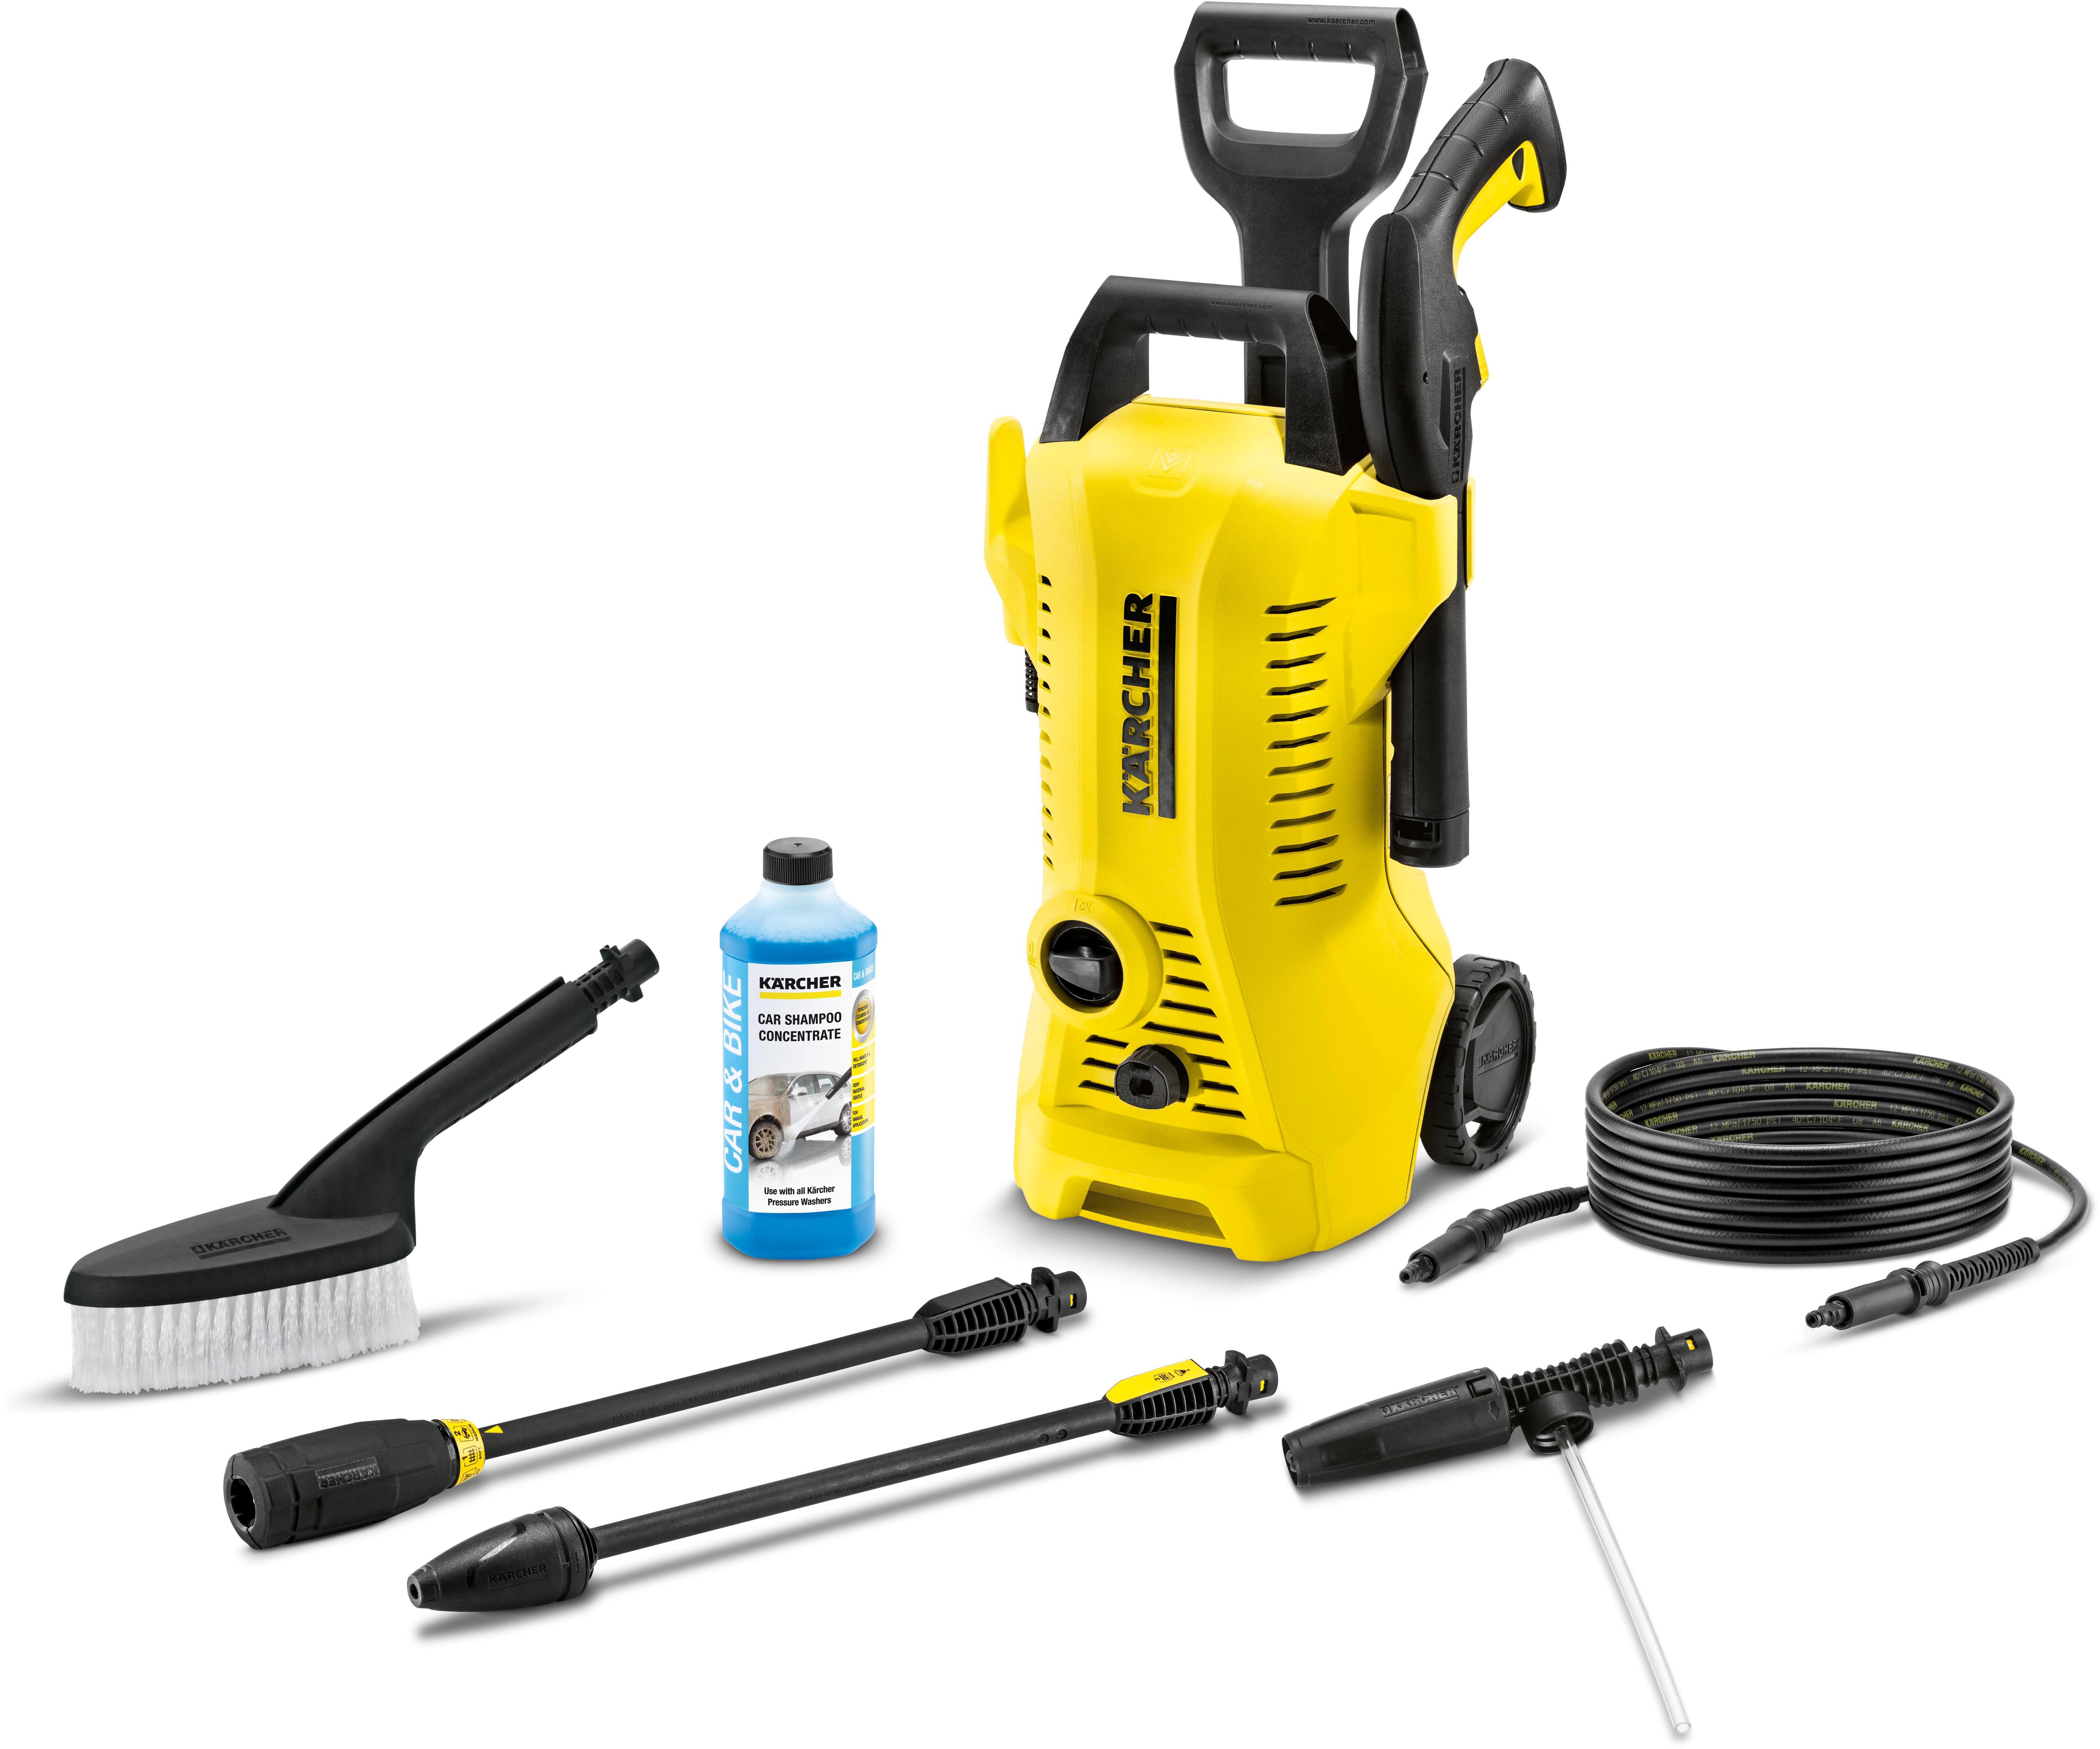 UK Cycling Events - SAVE £70! Special lower price on the Karcher